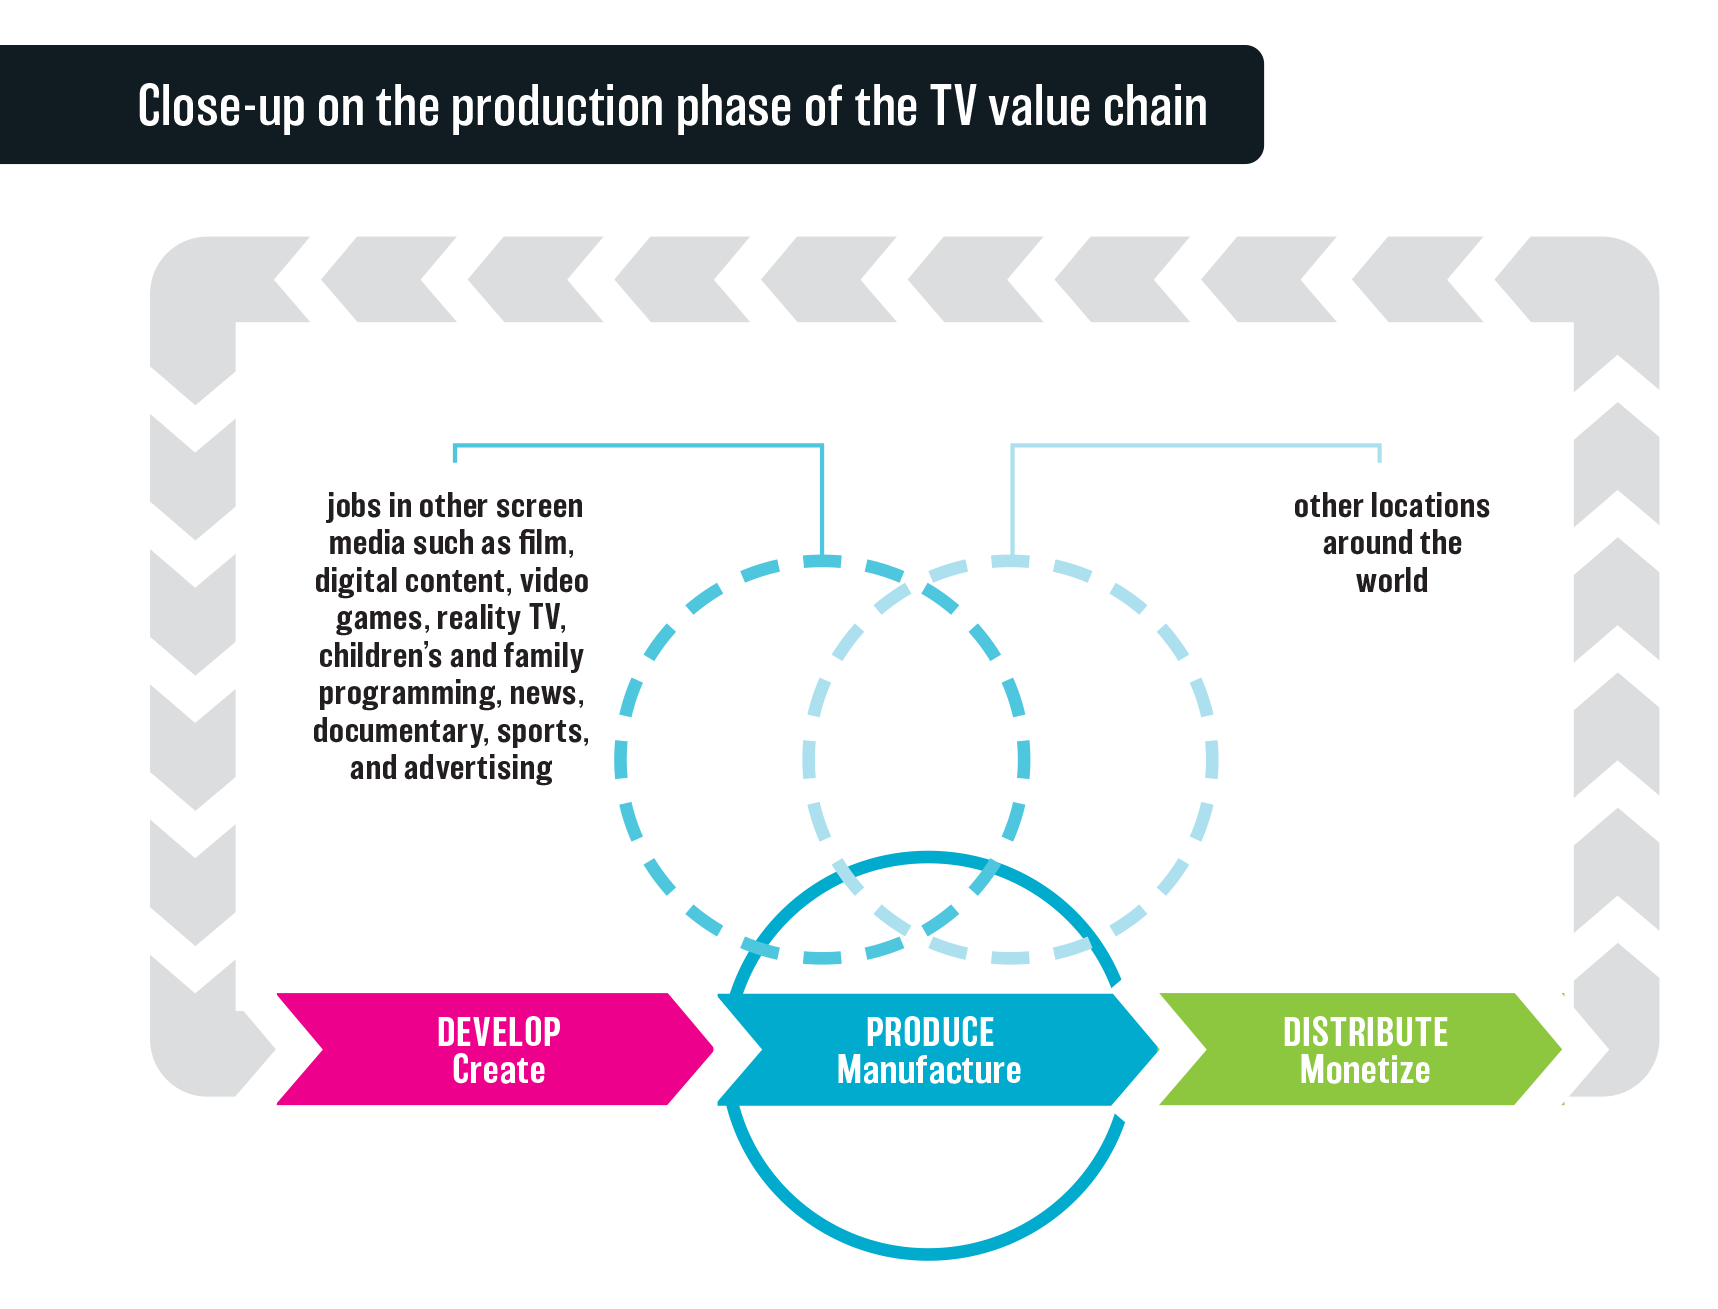 Figure 3.3: Close up on the production phase of the TV value chain